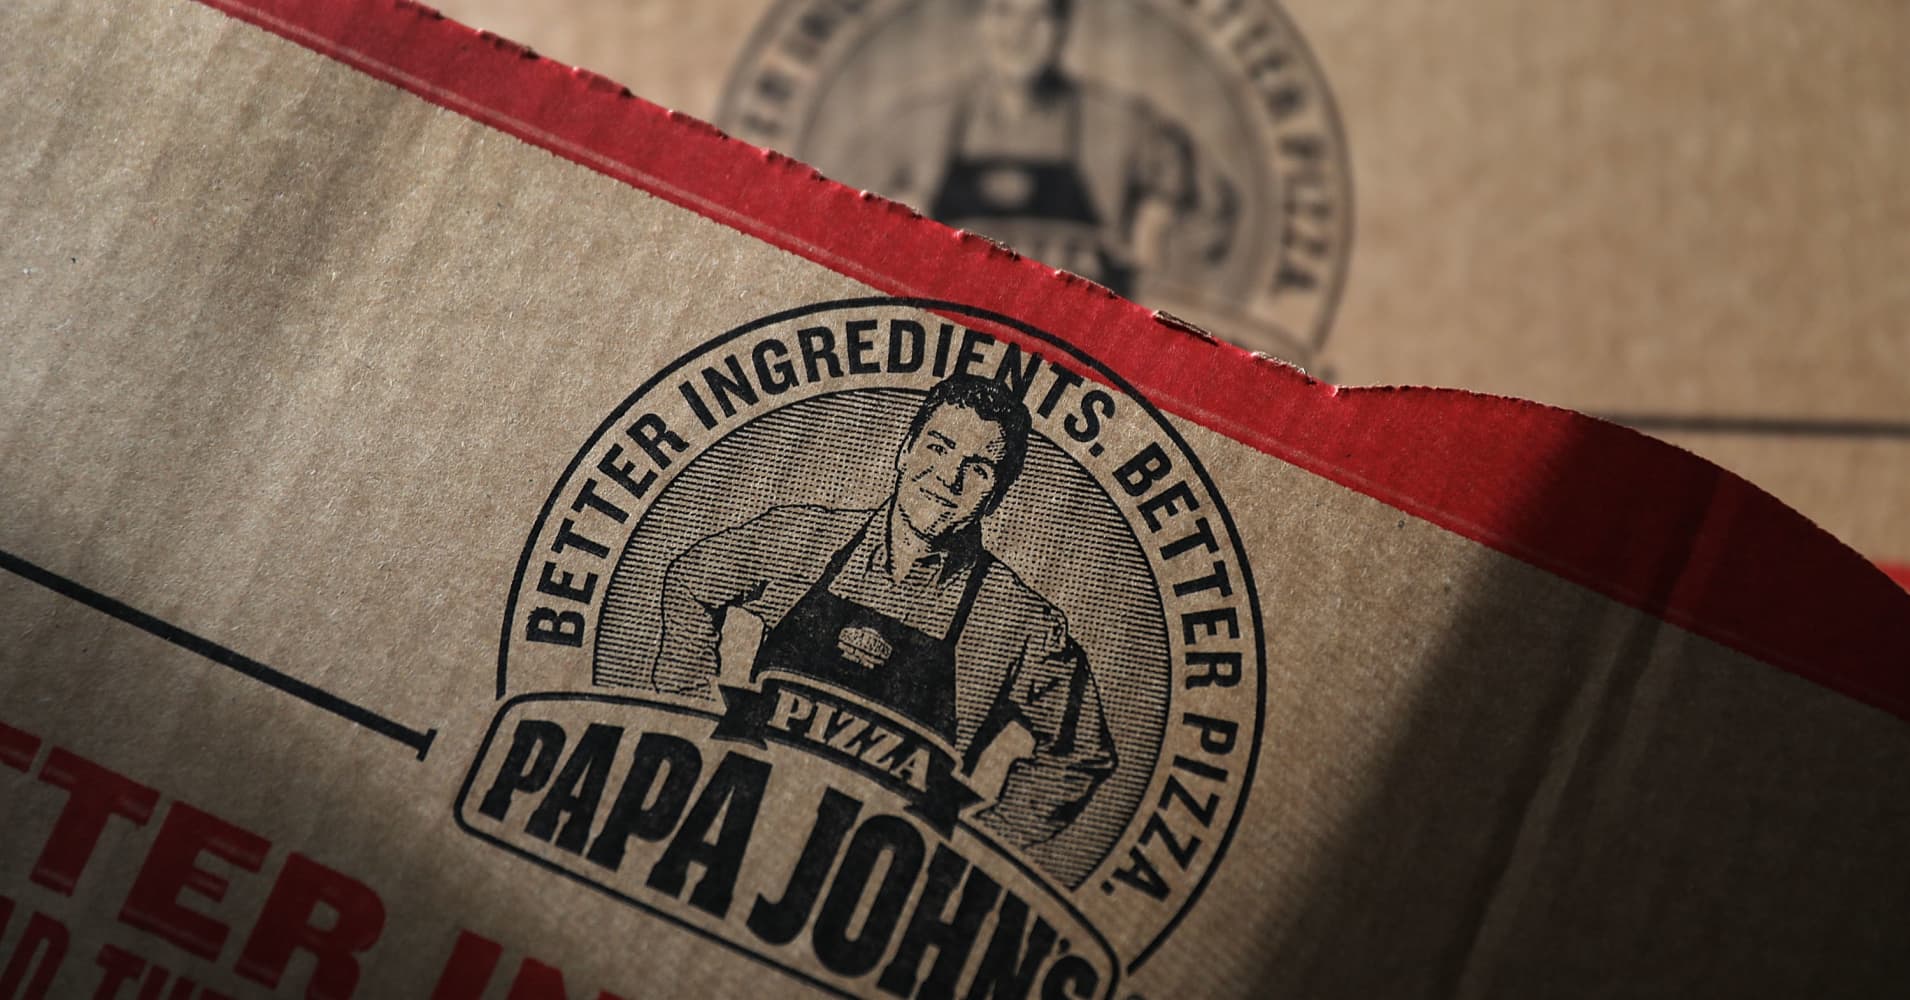 Papa John S Appoints Olivia F Kirtley As Chair Of Board Following John Schnatter S Resignation